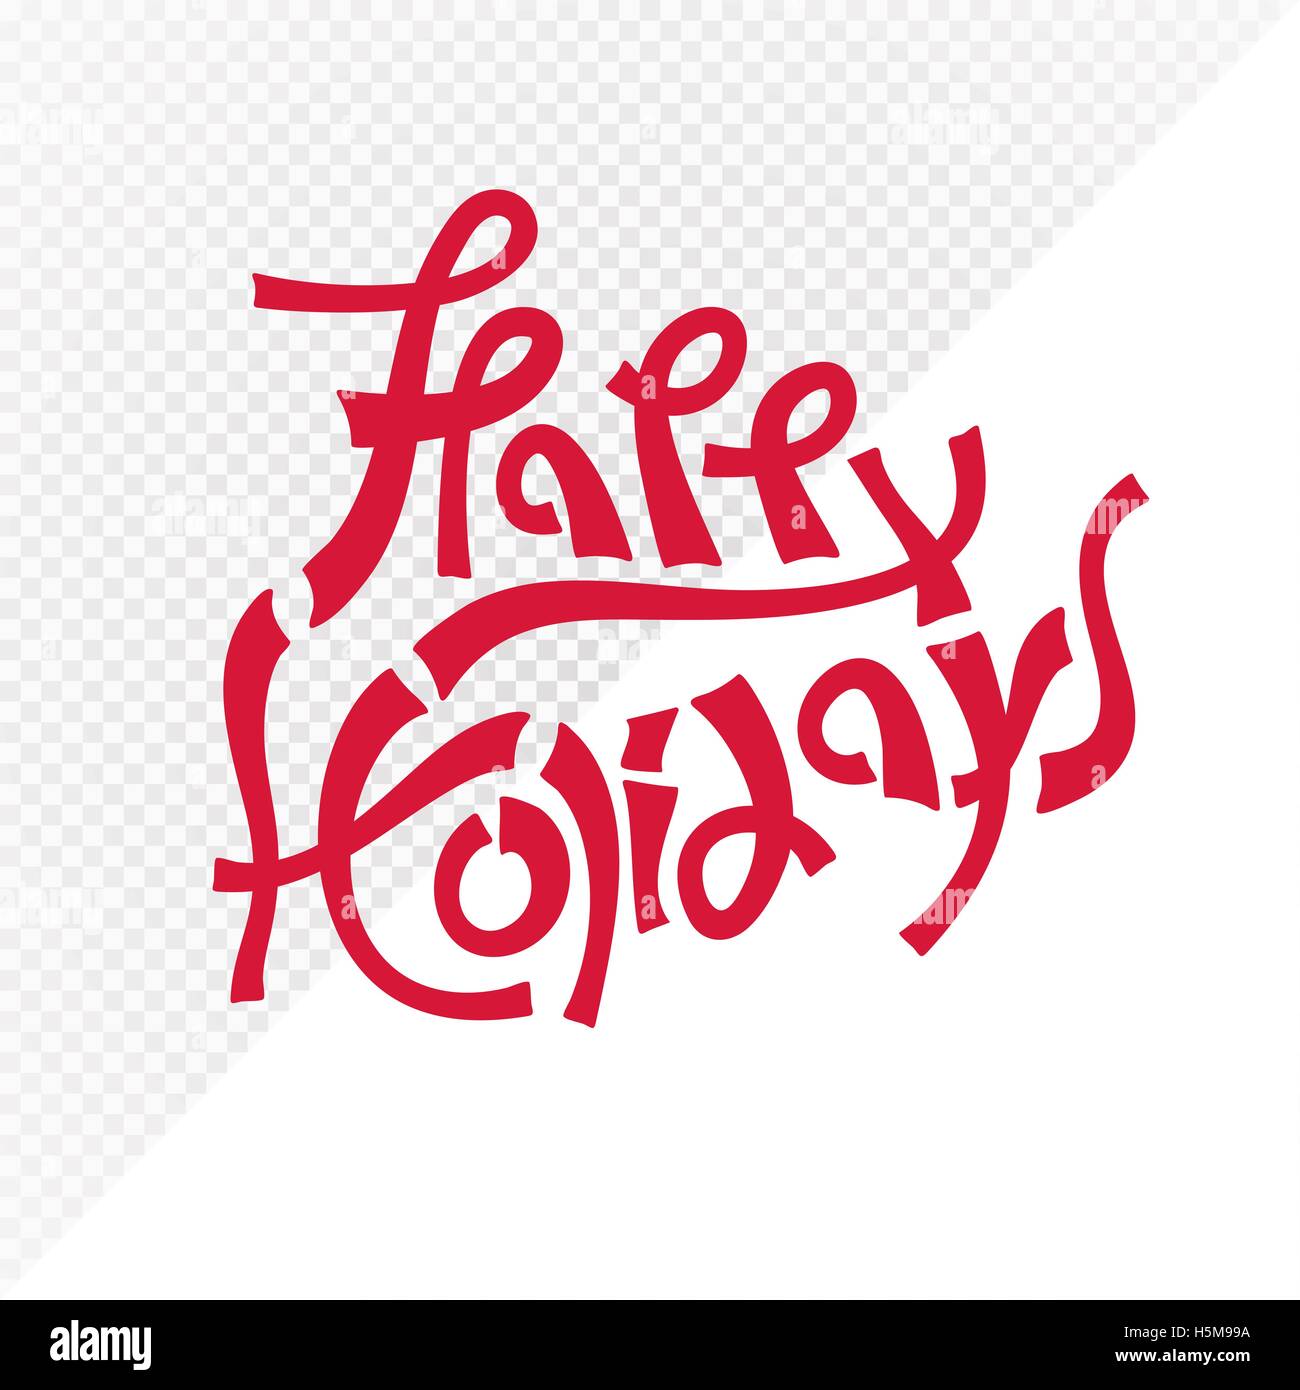 red happy holidays text lettering vector illustration isolated on white and transparent background simulation Stock Vector